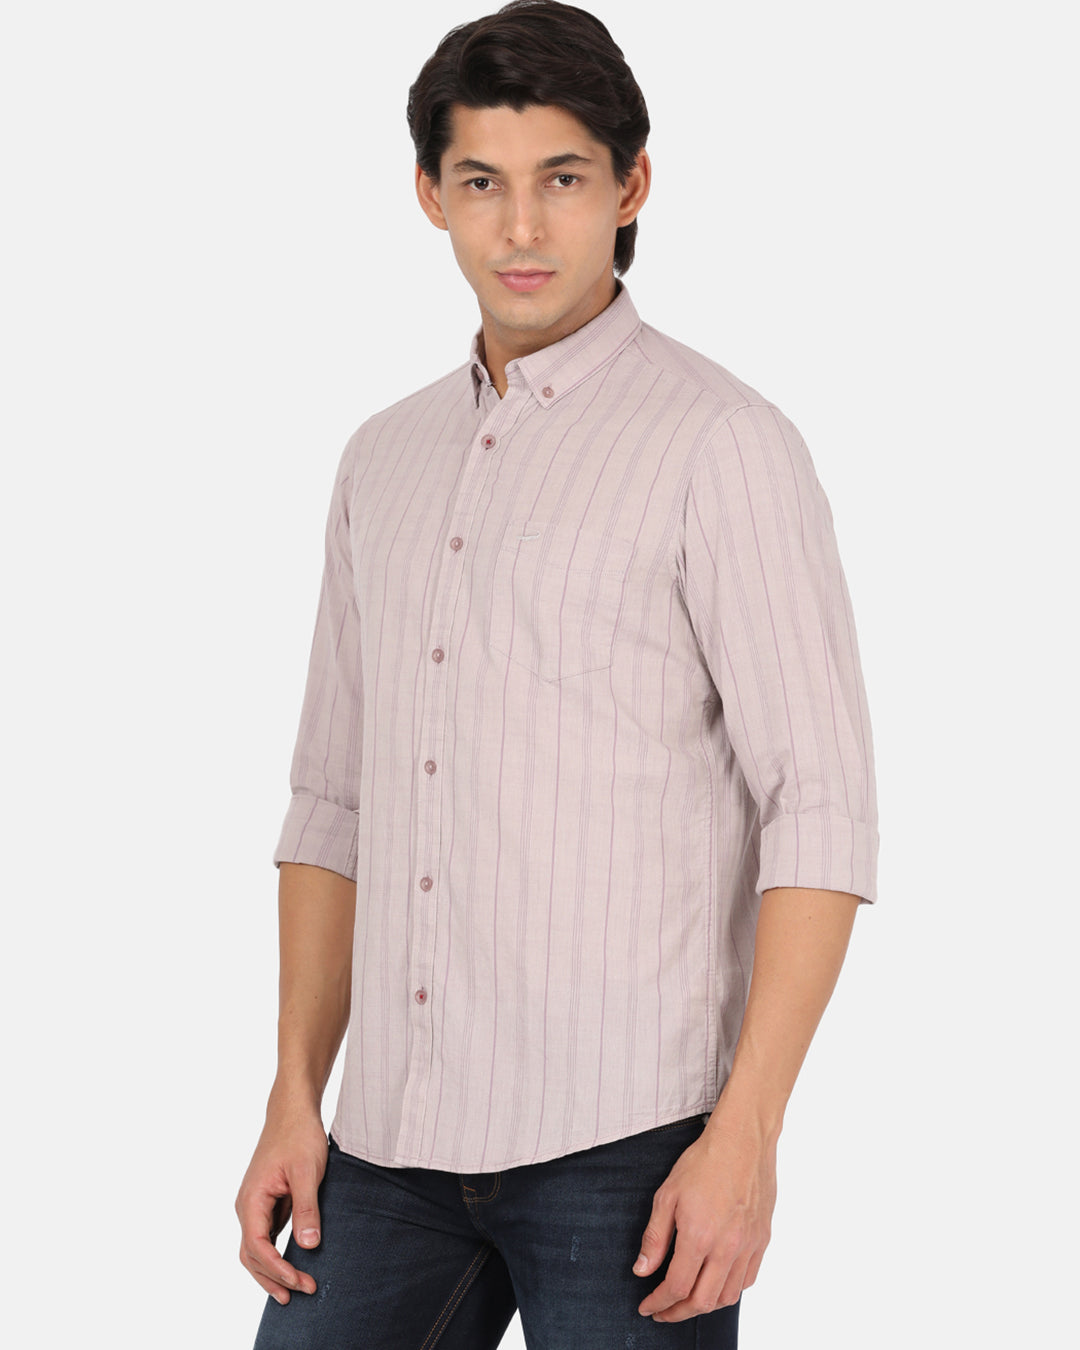 Crocodile Casual Full Sleeve Comfort Fit Stripes Purple with Collar Shirt for Men